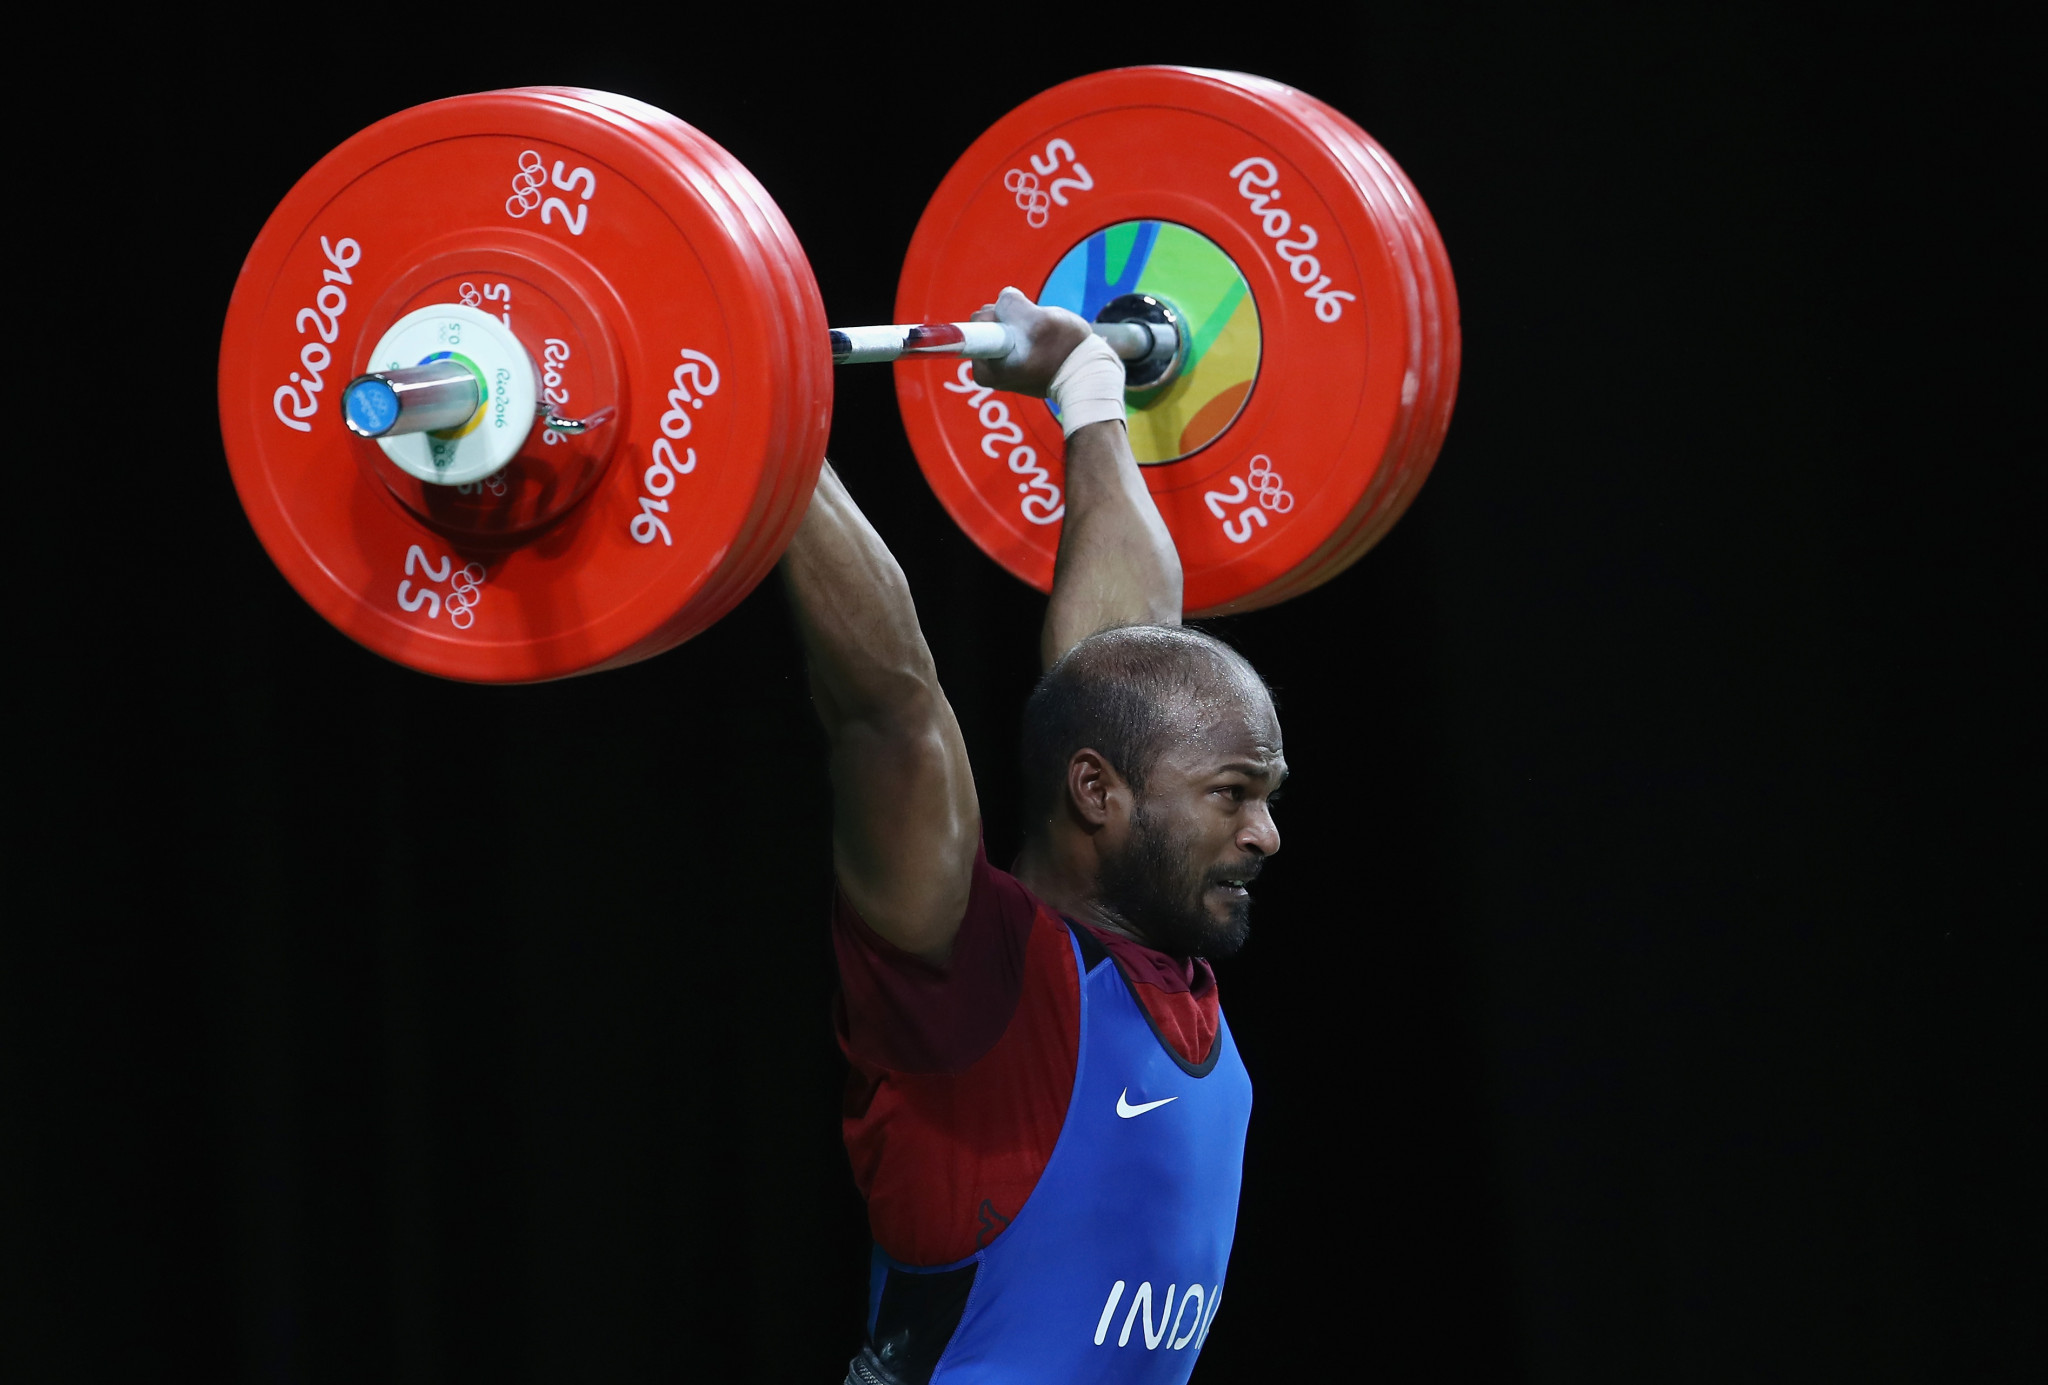 Glasgow 2014 champion continues Indian success at Commonwealth Weightlifting Championships